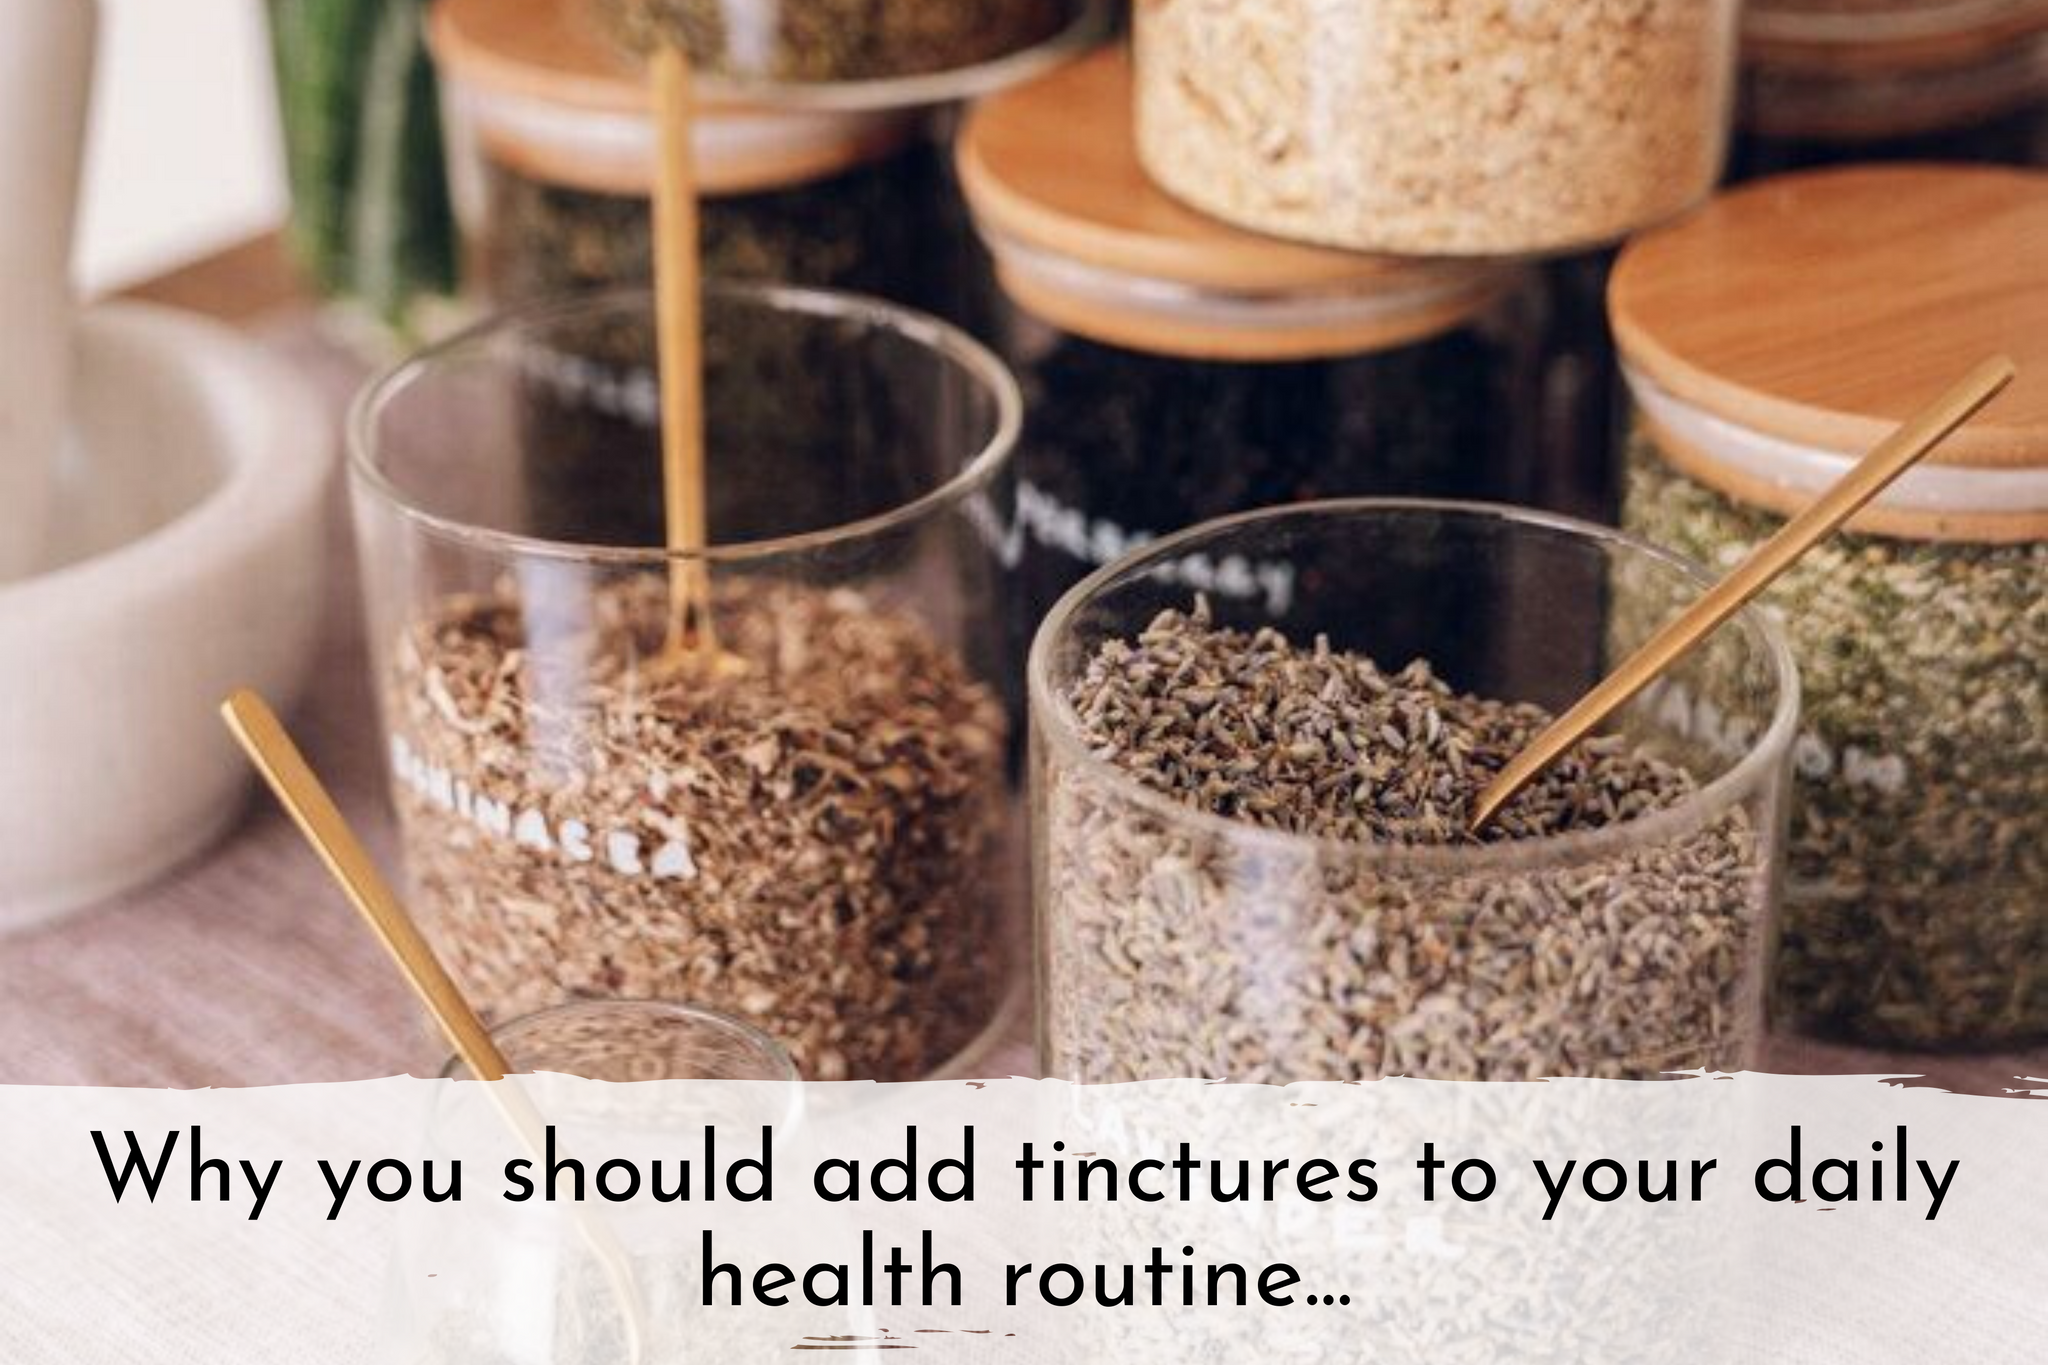  Why you should add tinctures to your daily health routine...